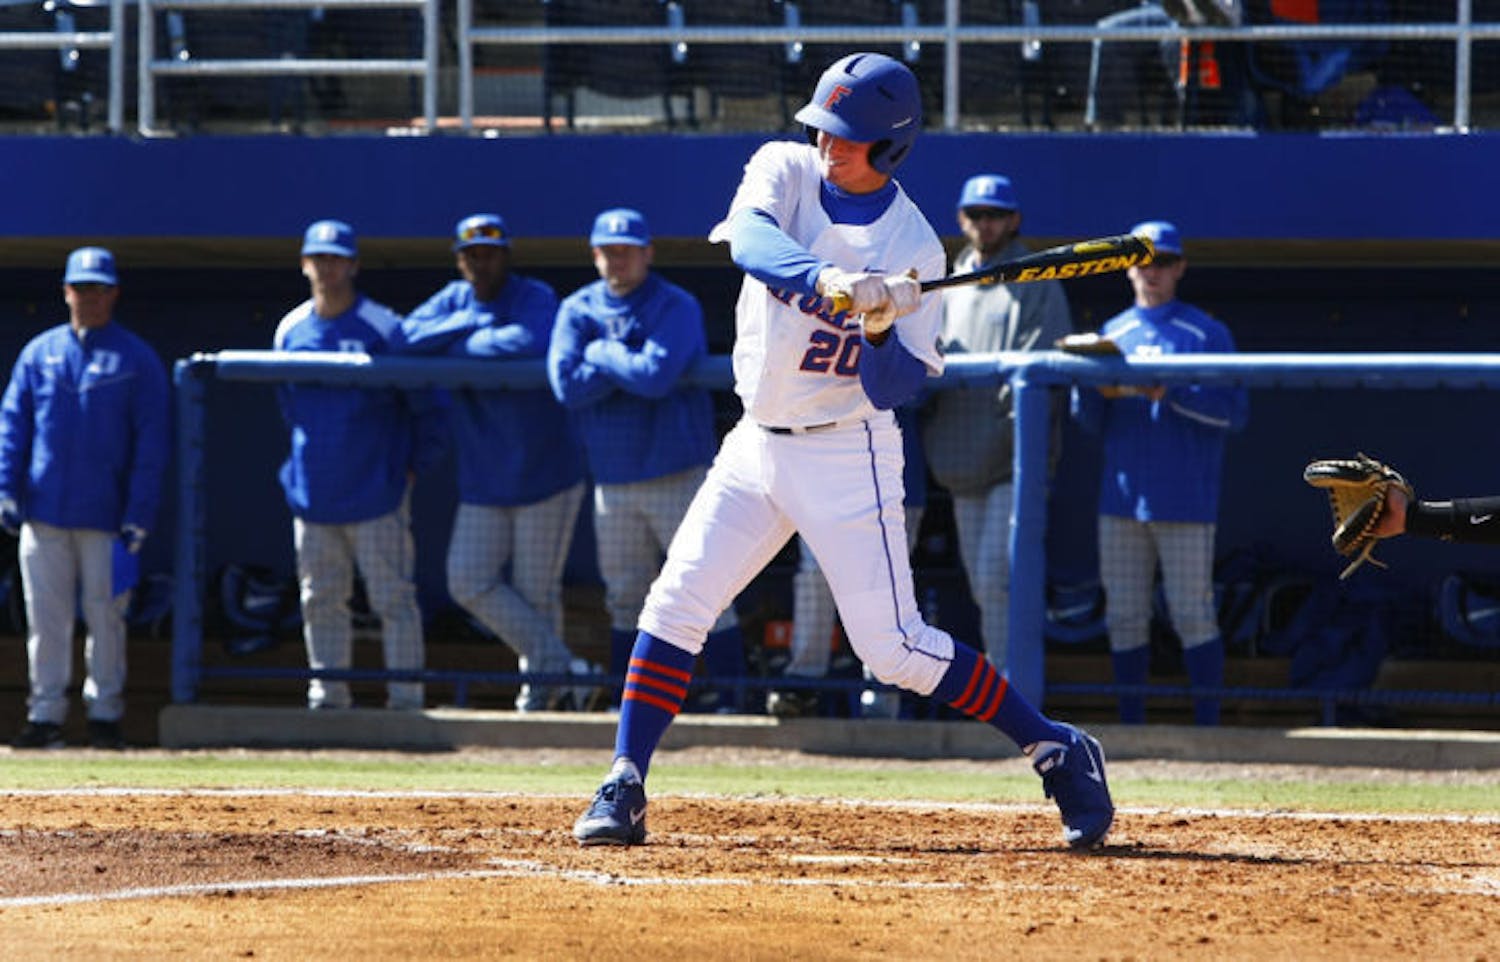 Senior center fielder Cody Dent swings during Florida’s 16-5 win against Duke on Feb. 17 at McKethan Stadium. Dent hit his first career home run against Florida A&amp;M on Monday.